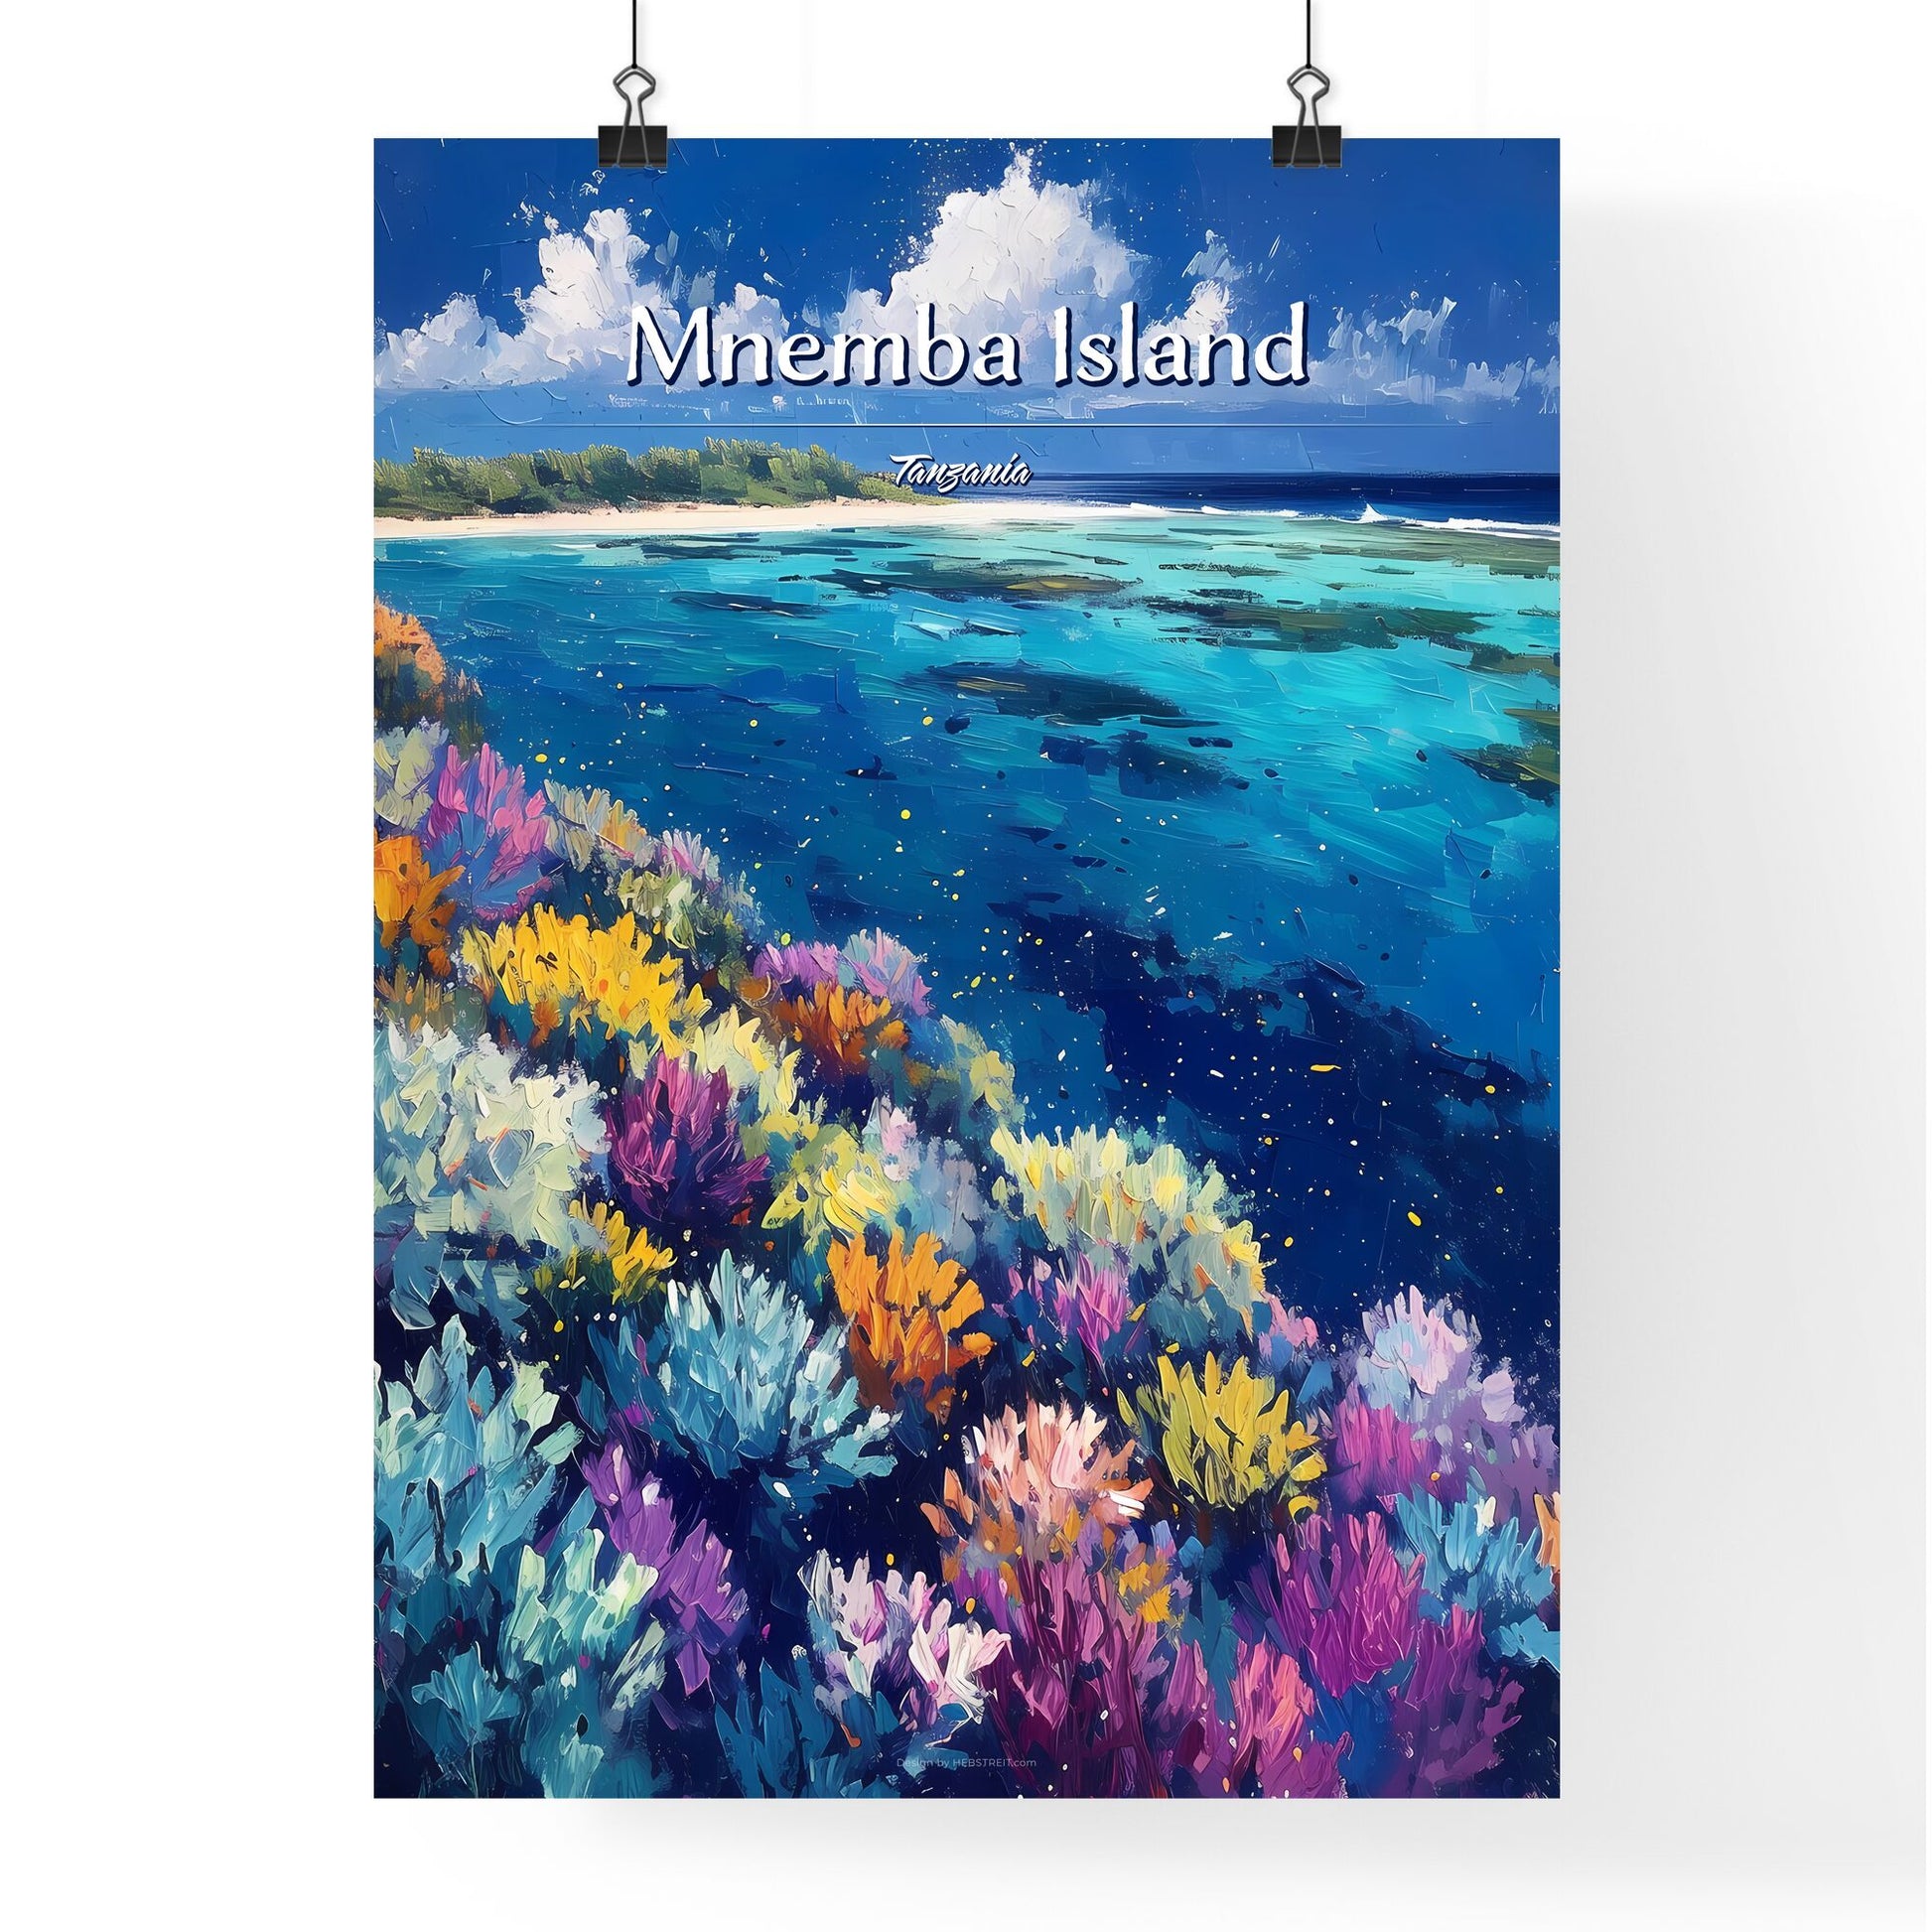 Mnemba Island, Tanzania - Art print of a colorful flowers on a beach Default Title